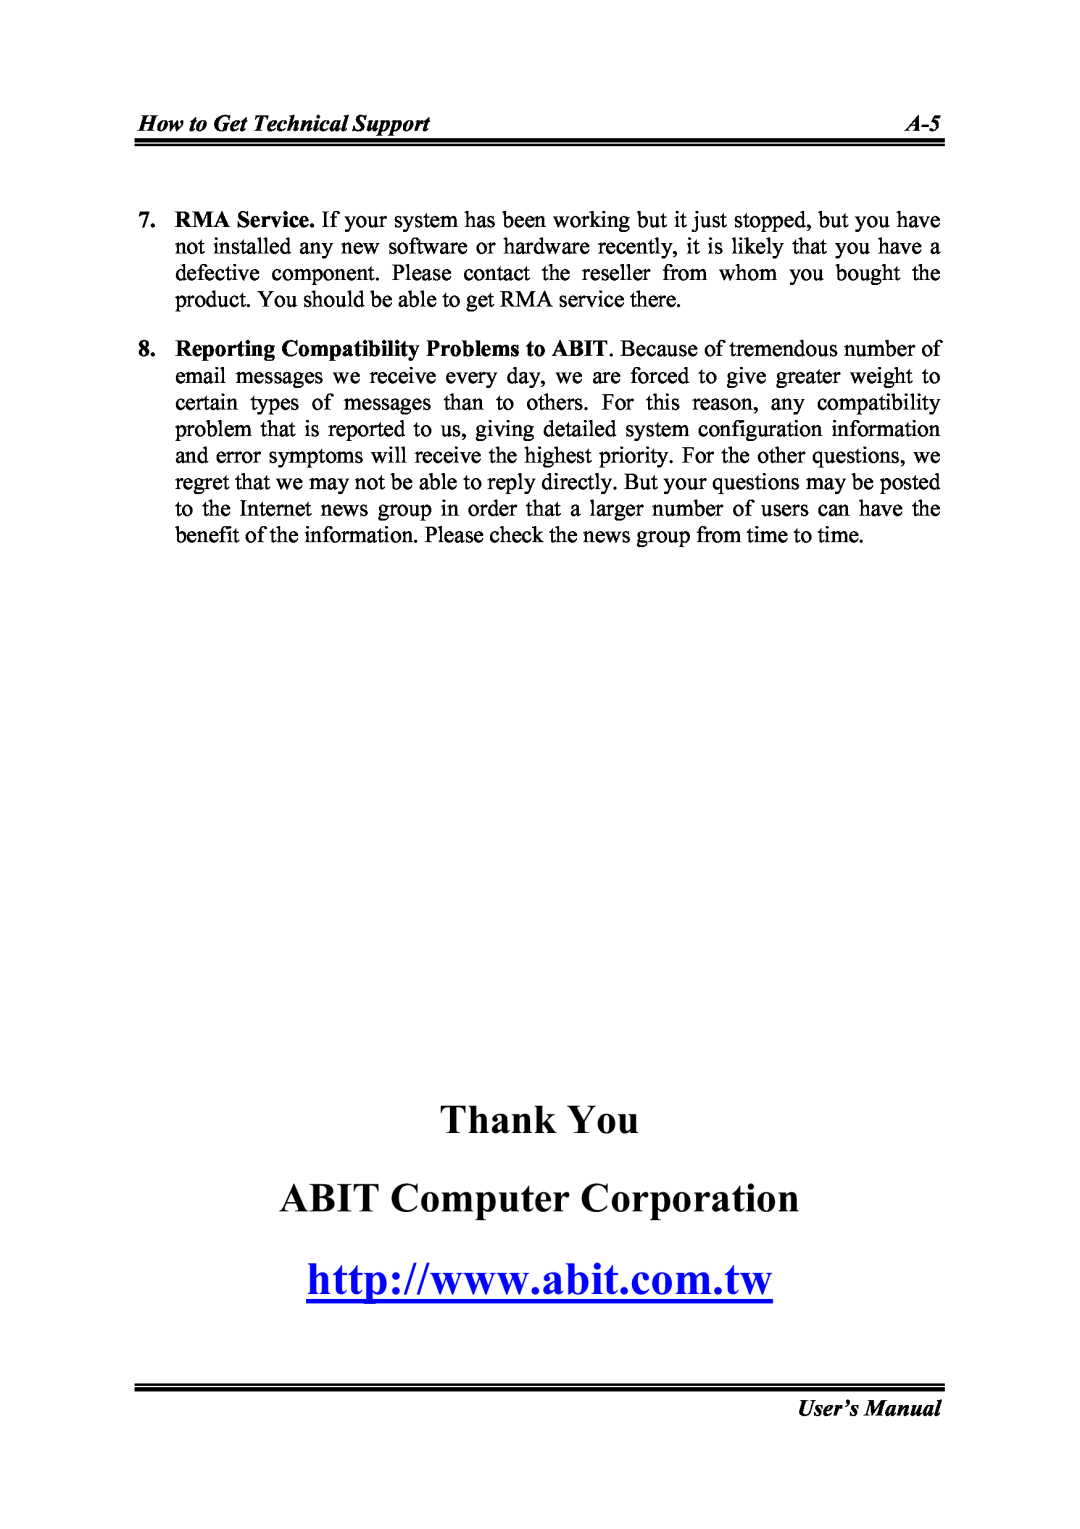 Abit IS-11, IS-12, IS-20, IS-10 user manual Thank You ABIT Computer Corporation, How to Get Technical Support, User’s Manual 